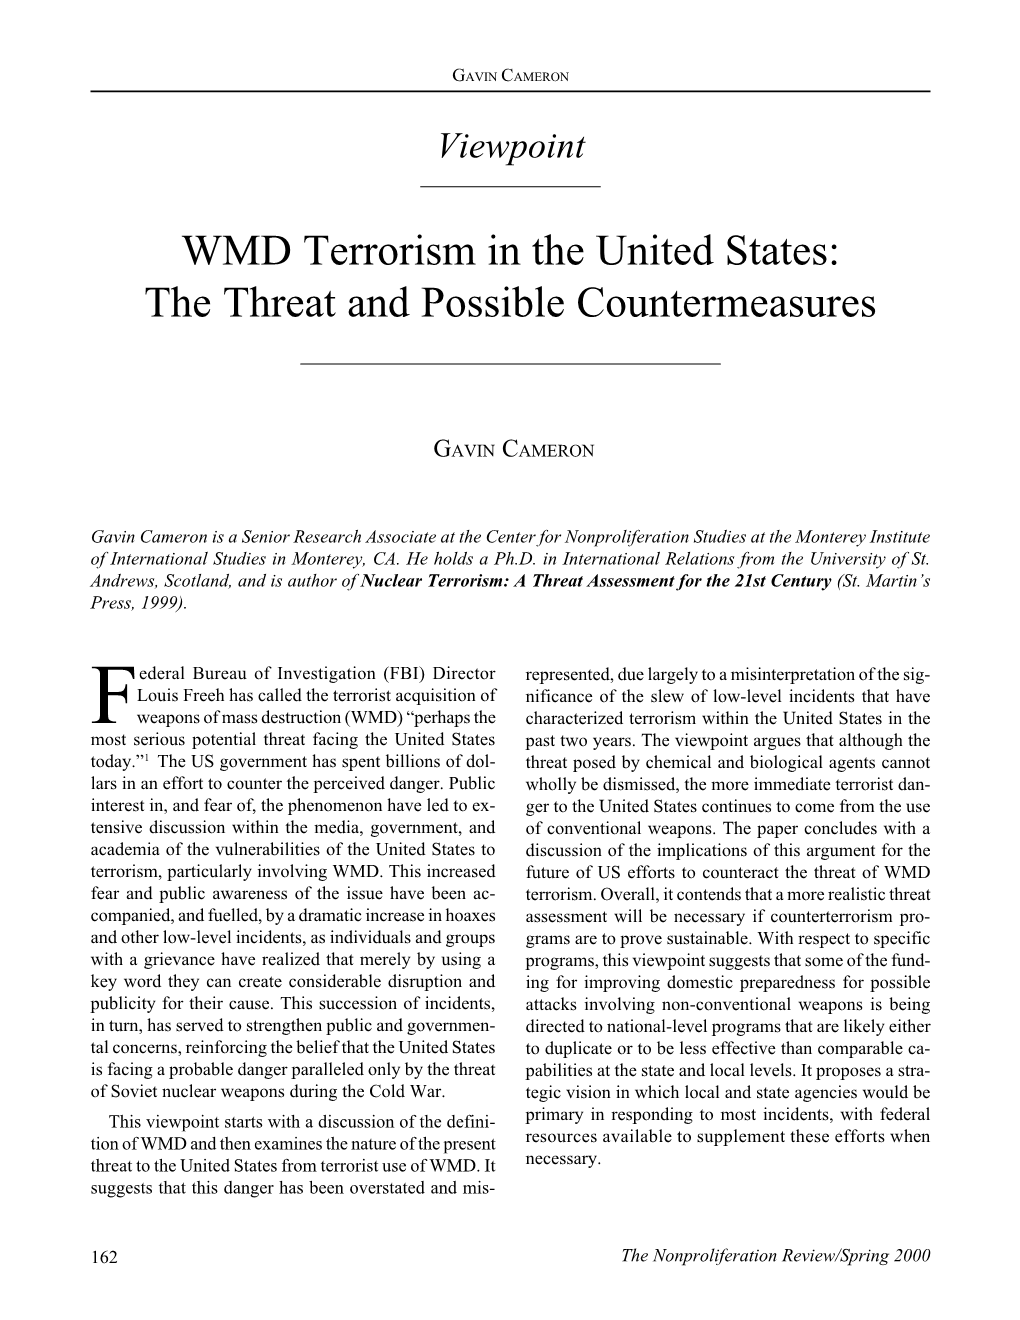 NPR 7.1: WMD Terrorism in the United States: the Threat and Possible